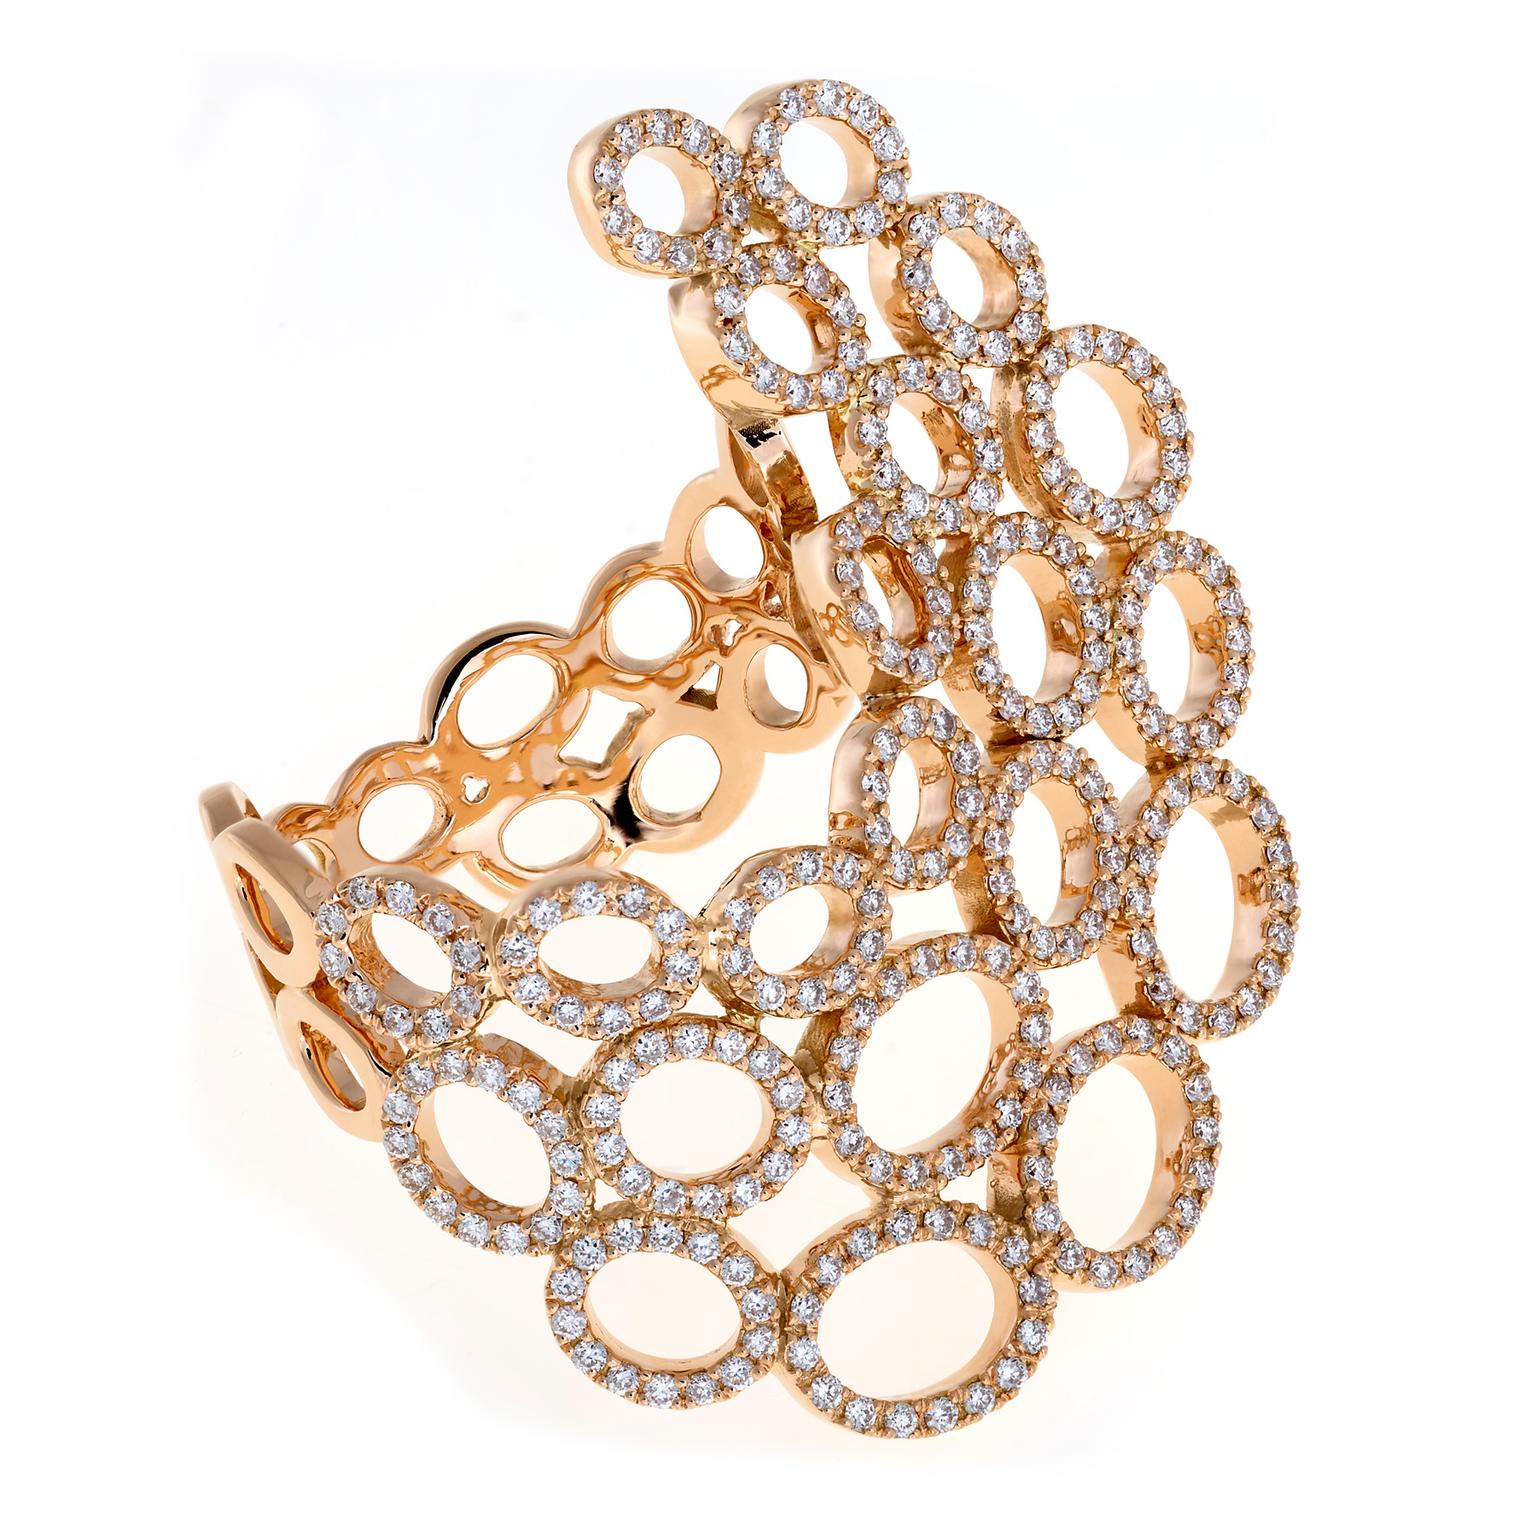 Christina Debs lace ring